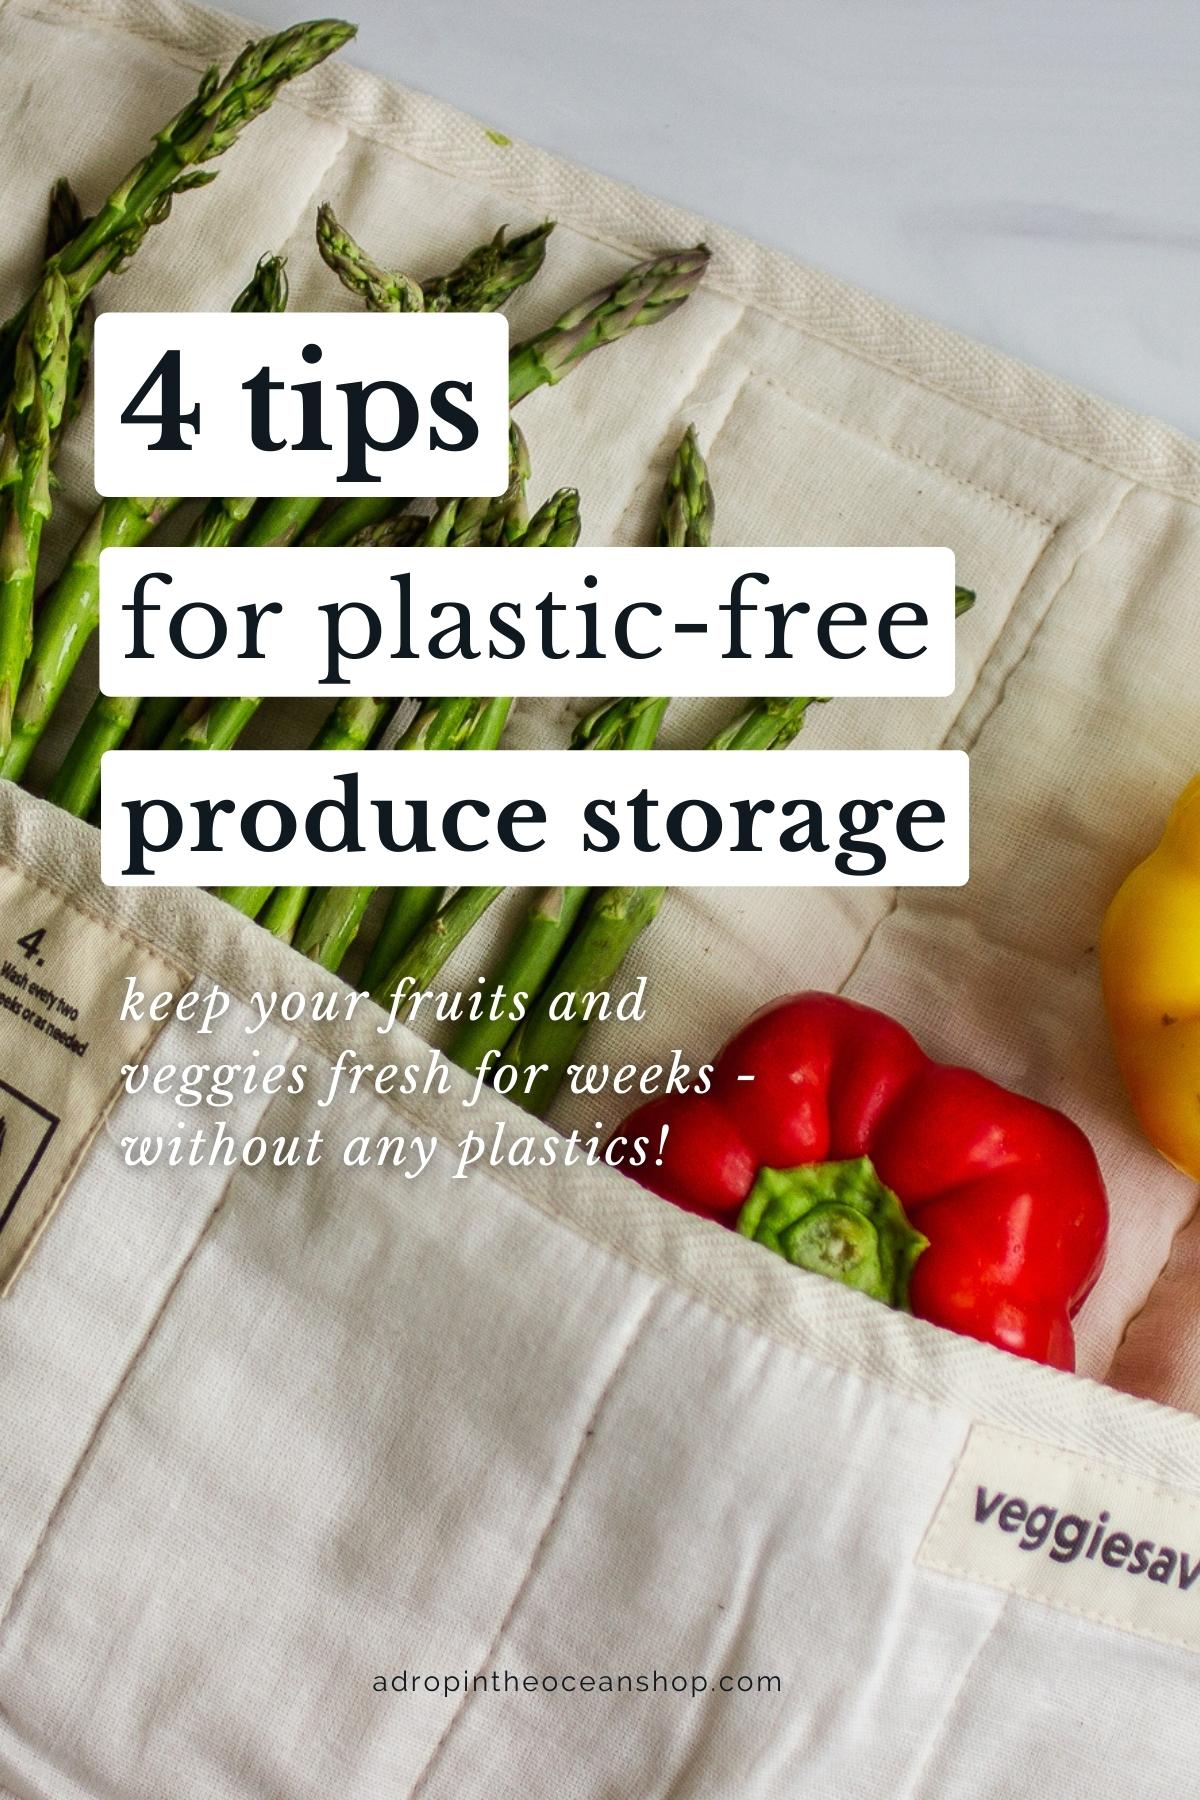 A Drop in the Ocean Online Zero Waste Store How to Store Produce Without Plastic